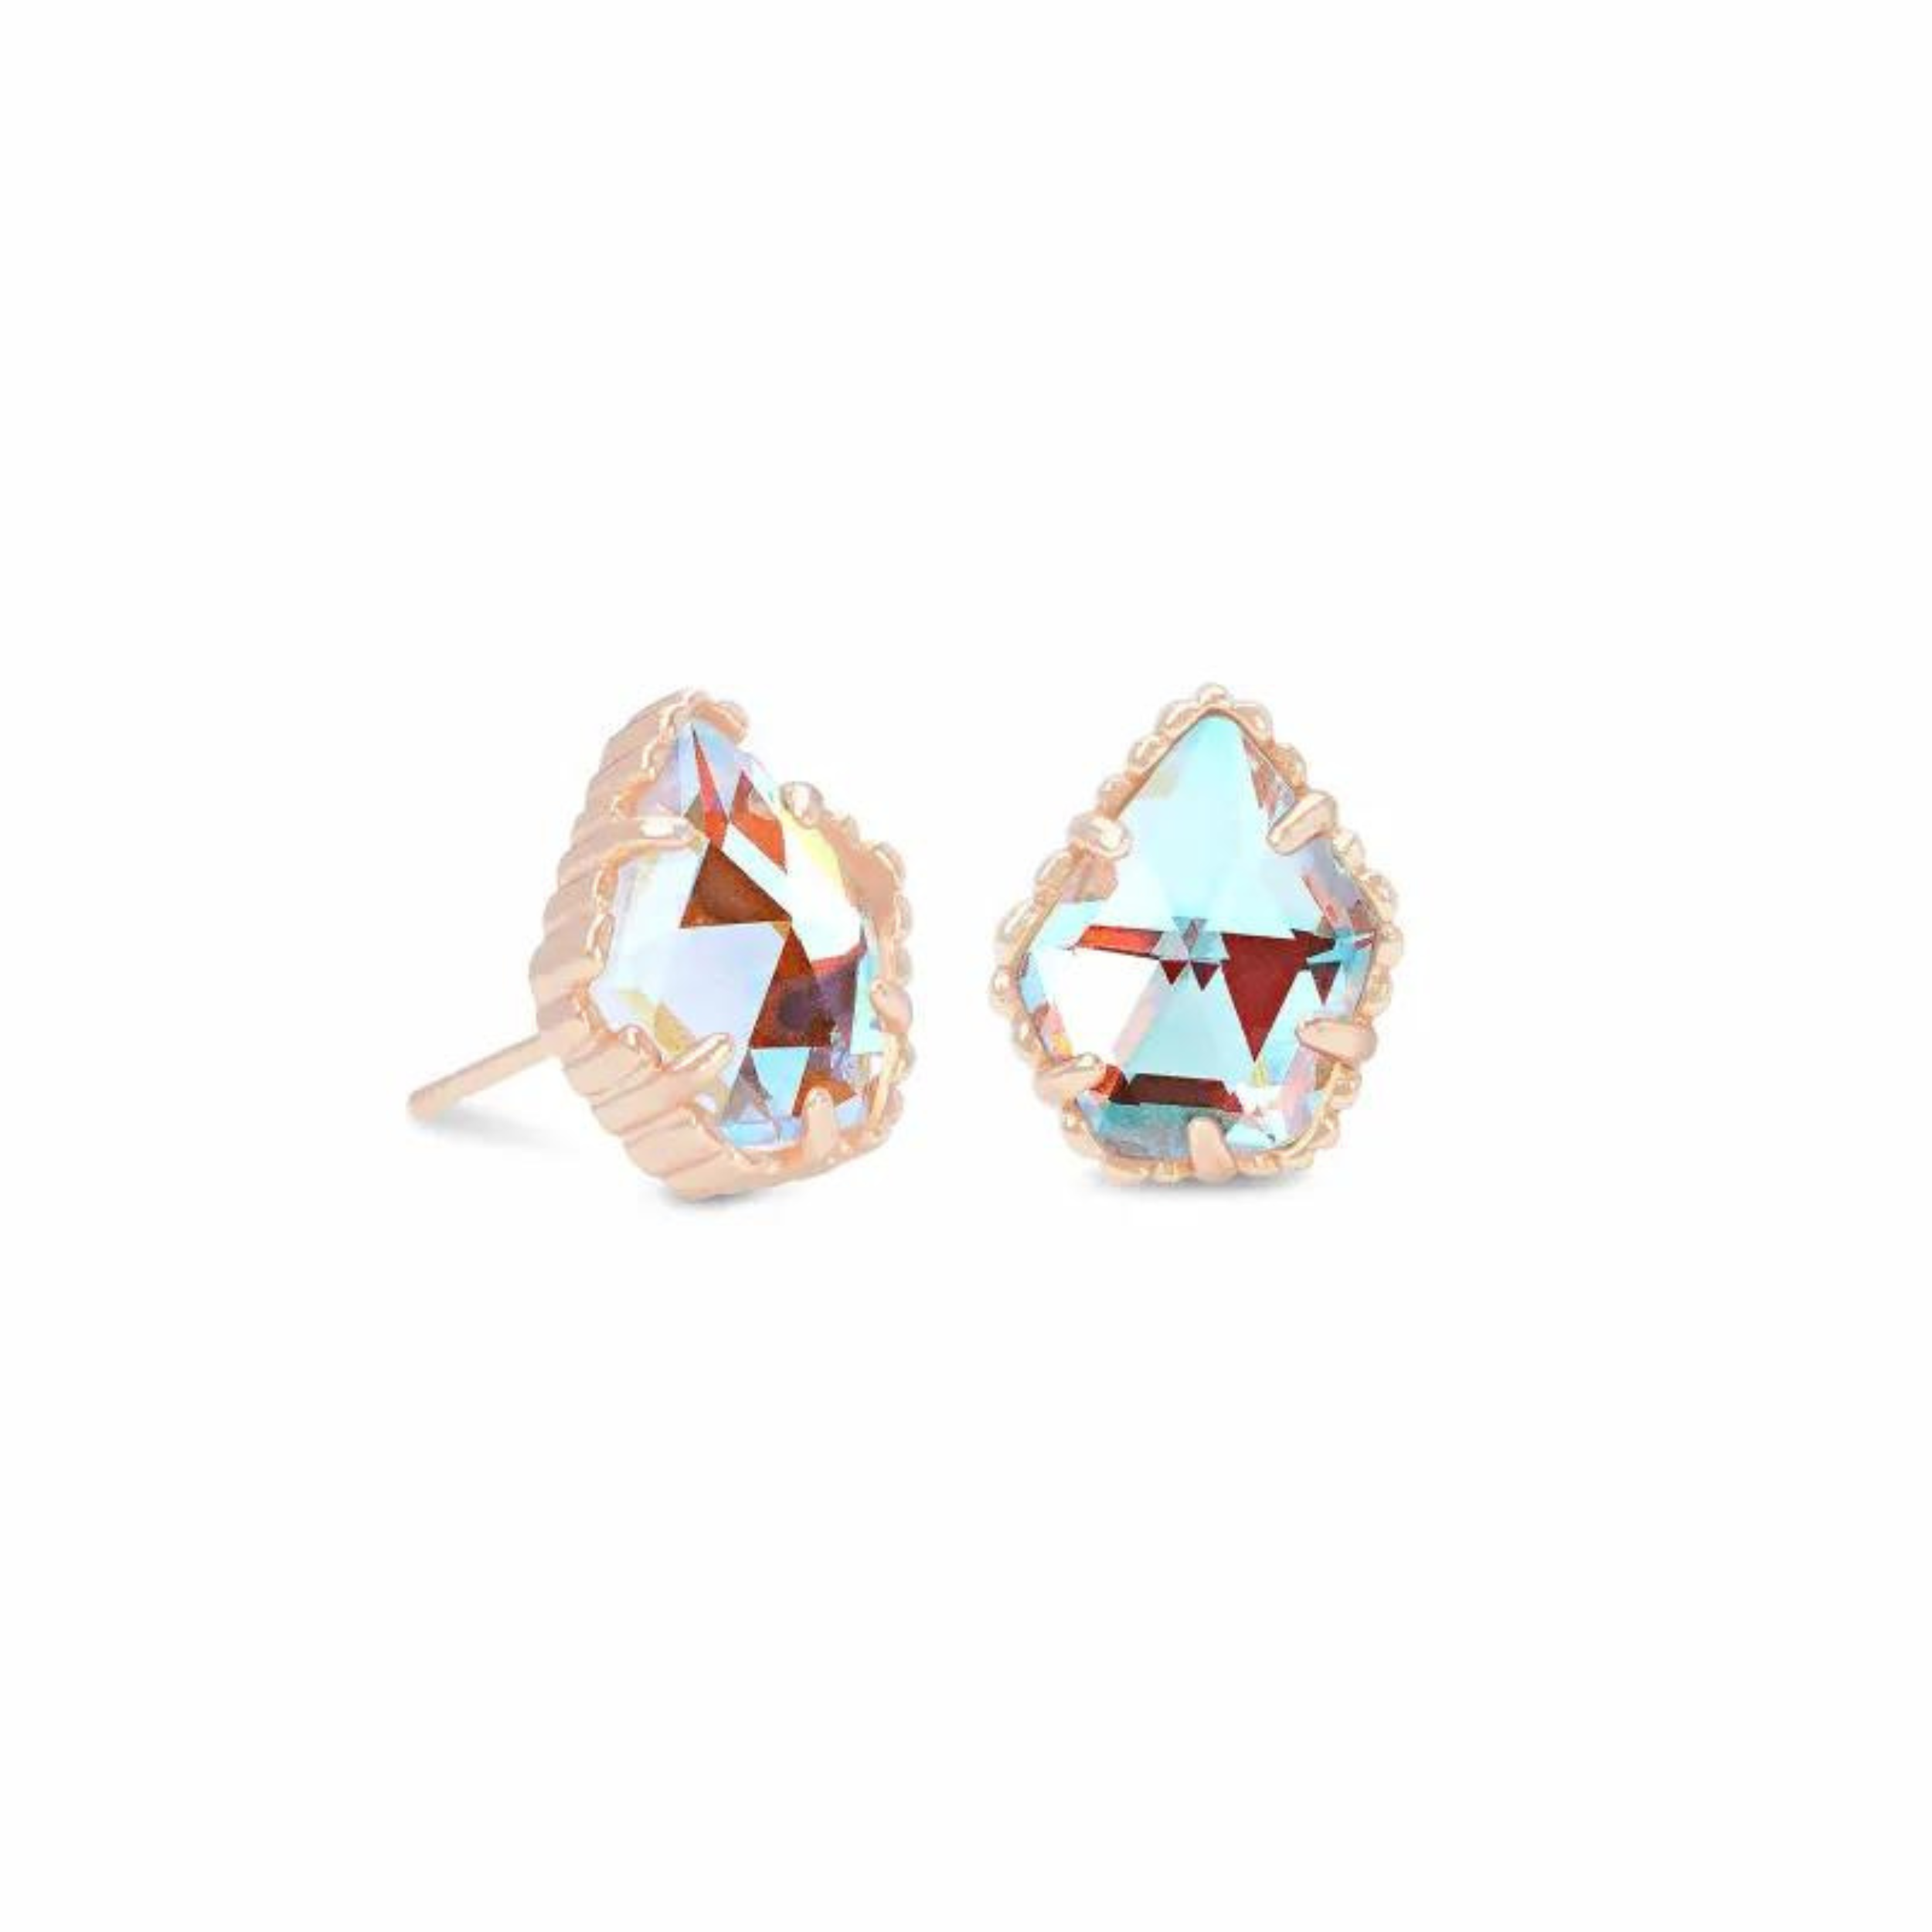 Rose gold stud earrings with dichoric glass in the center, pictured on a white background.